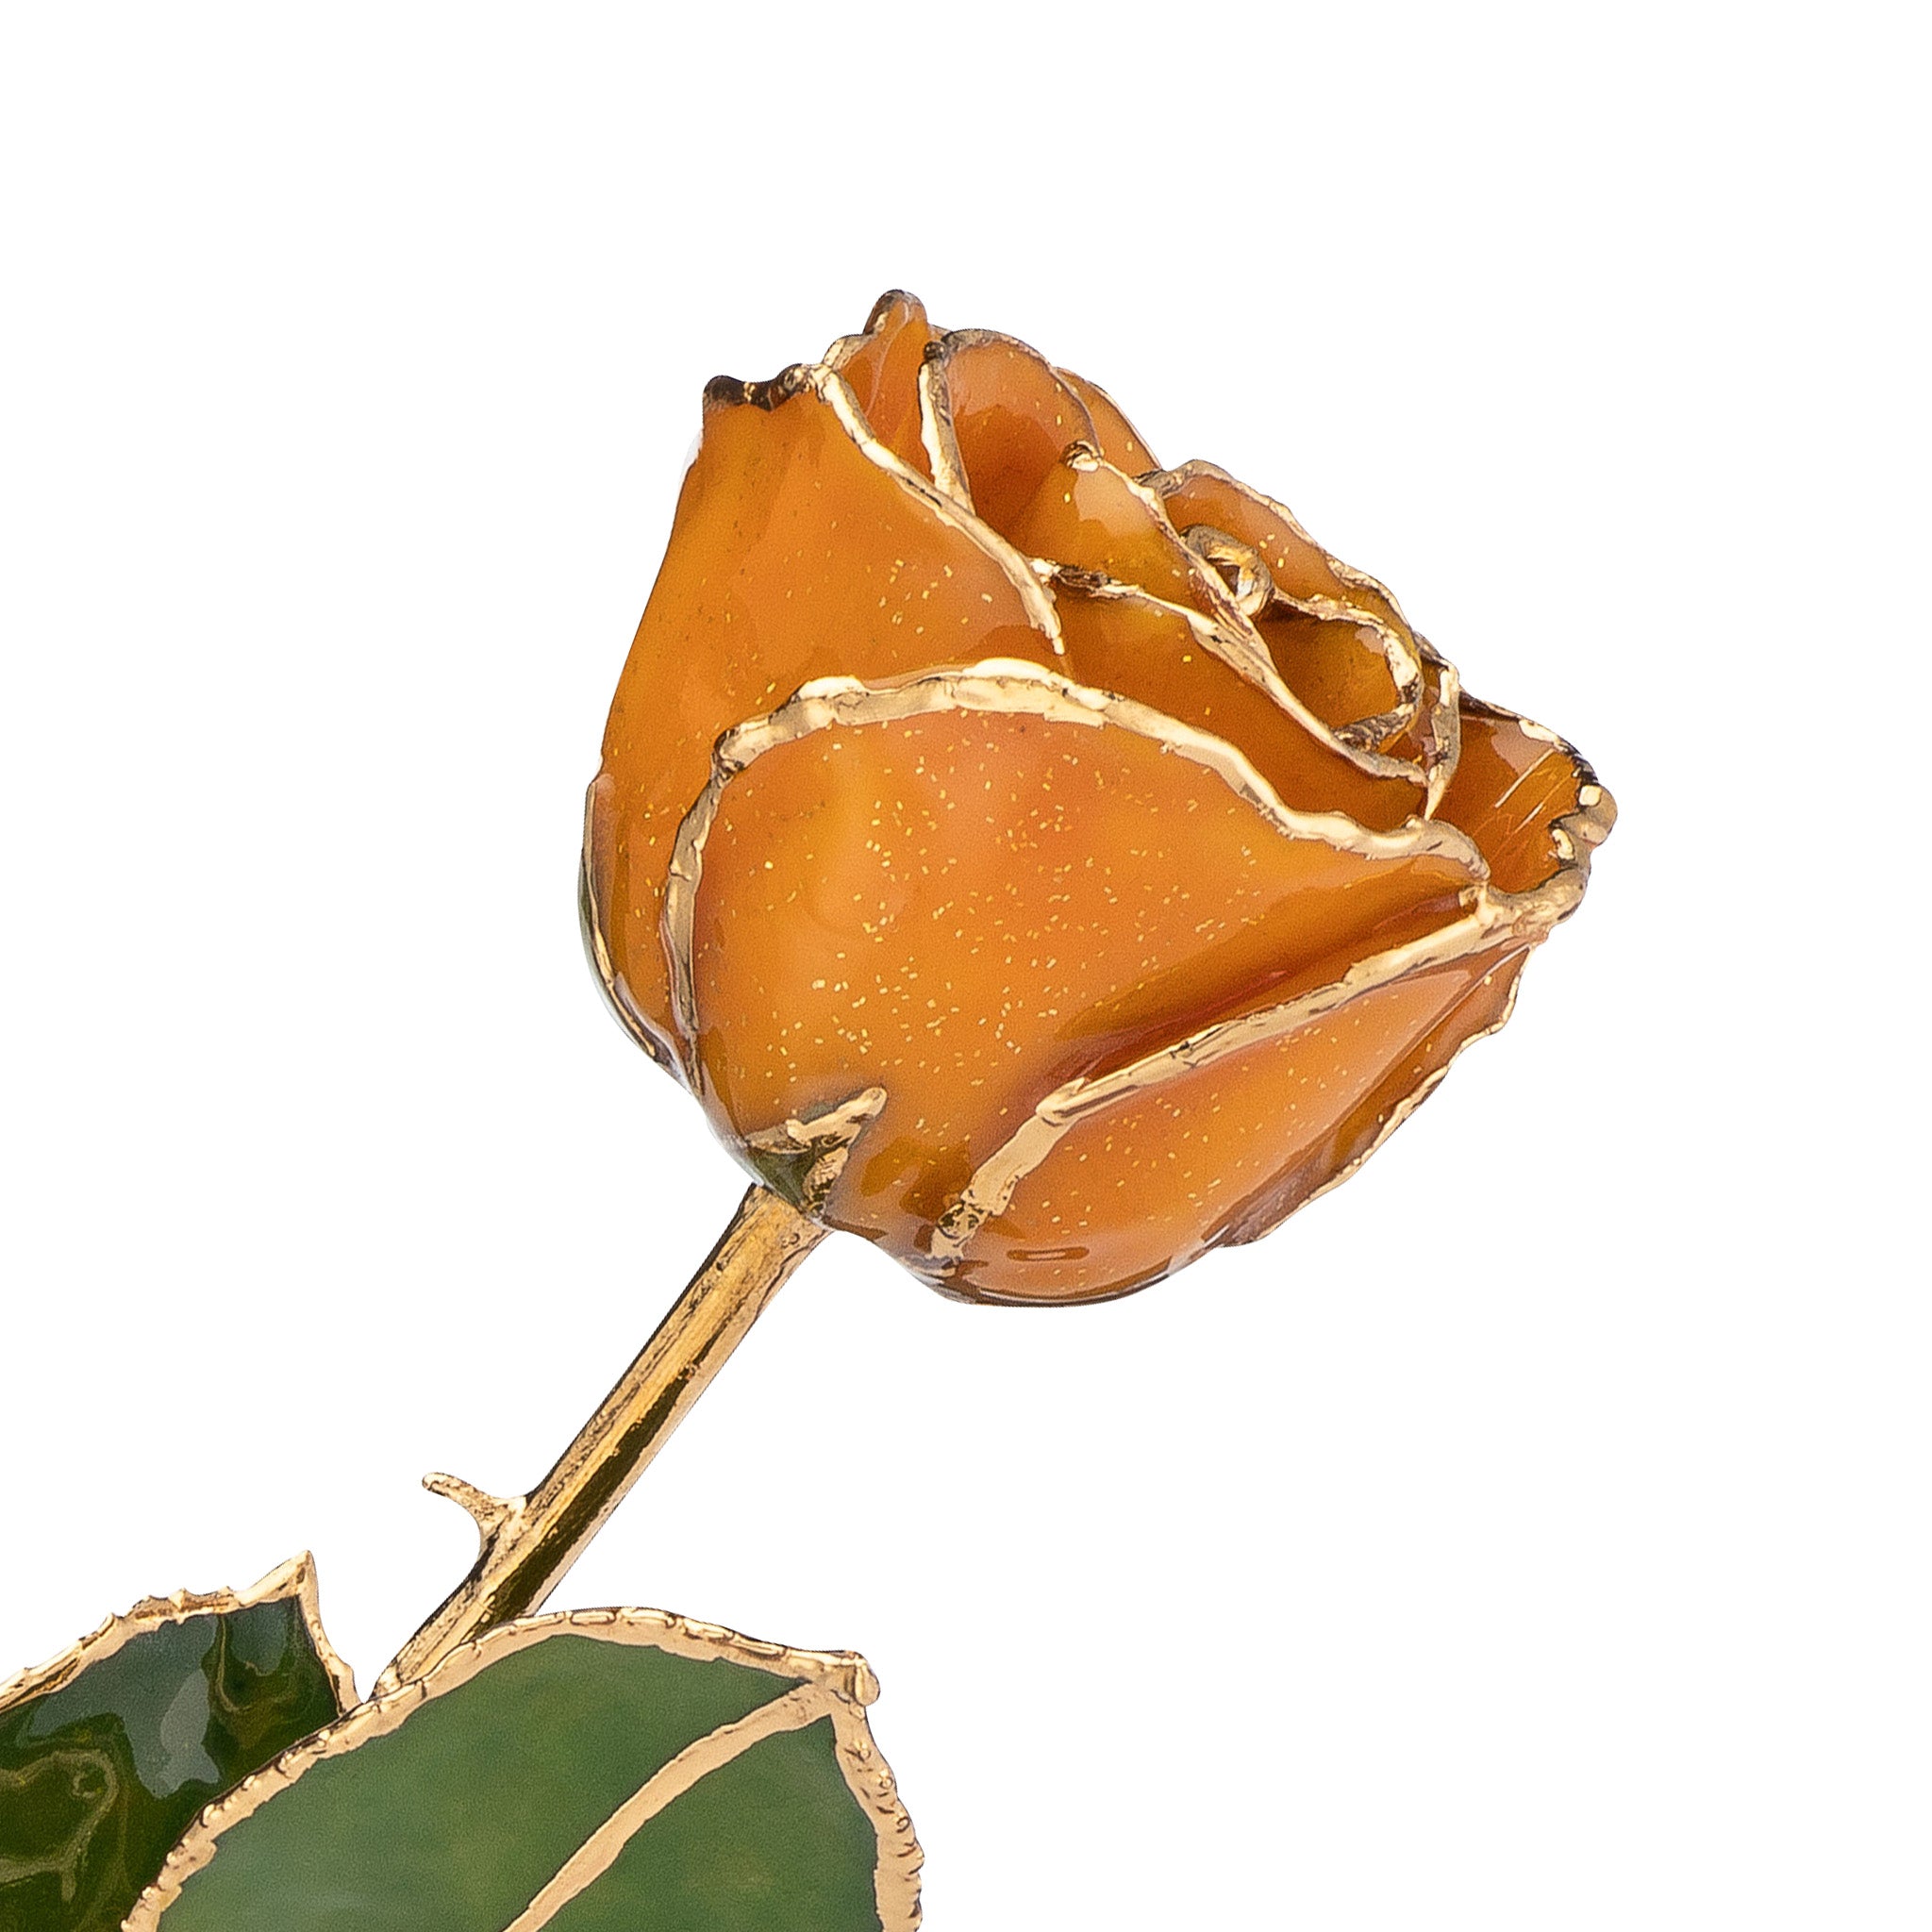 November Birthstone Rose - 24K Gold Trimmed Forever Rose with Topaz or Citrine (Amber color) Petals with Gold colored Suspended Sparkles. View of Stem, Leaves, and Rose Petals and Showing Detail of Gold Trim